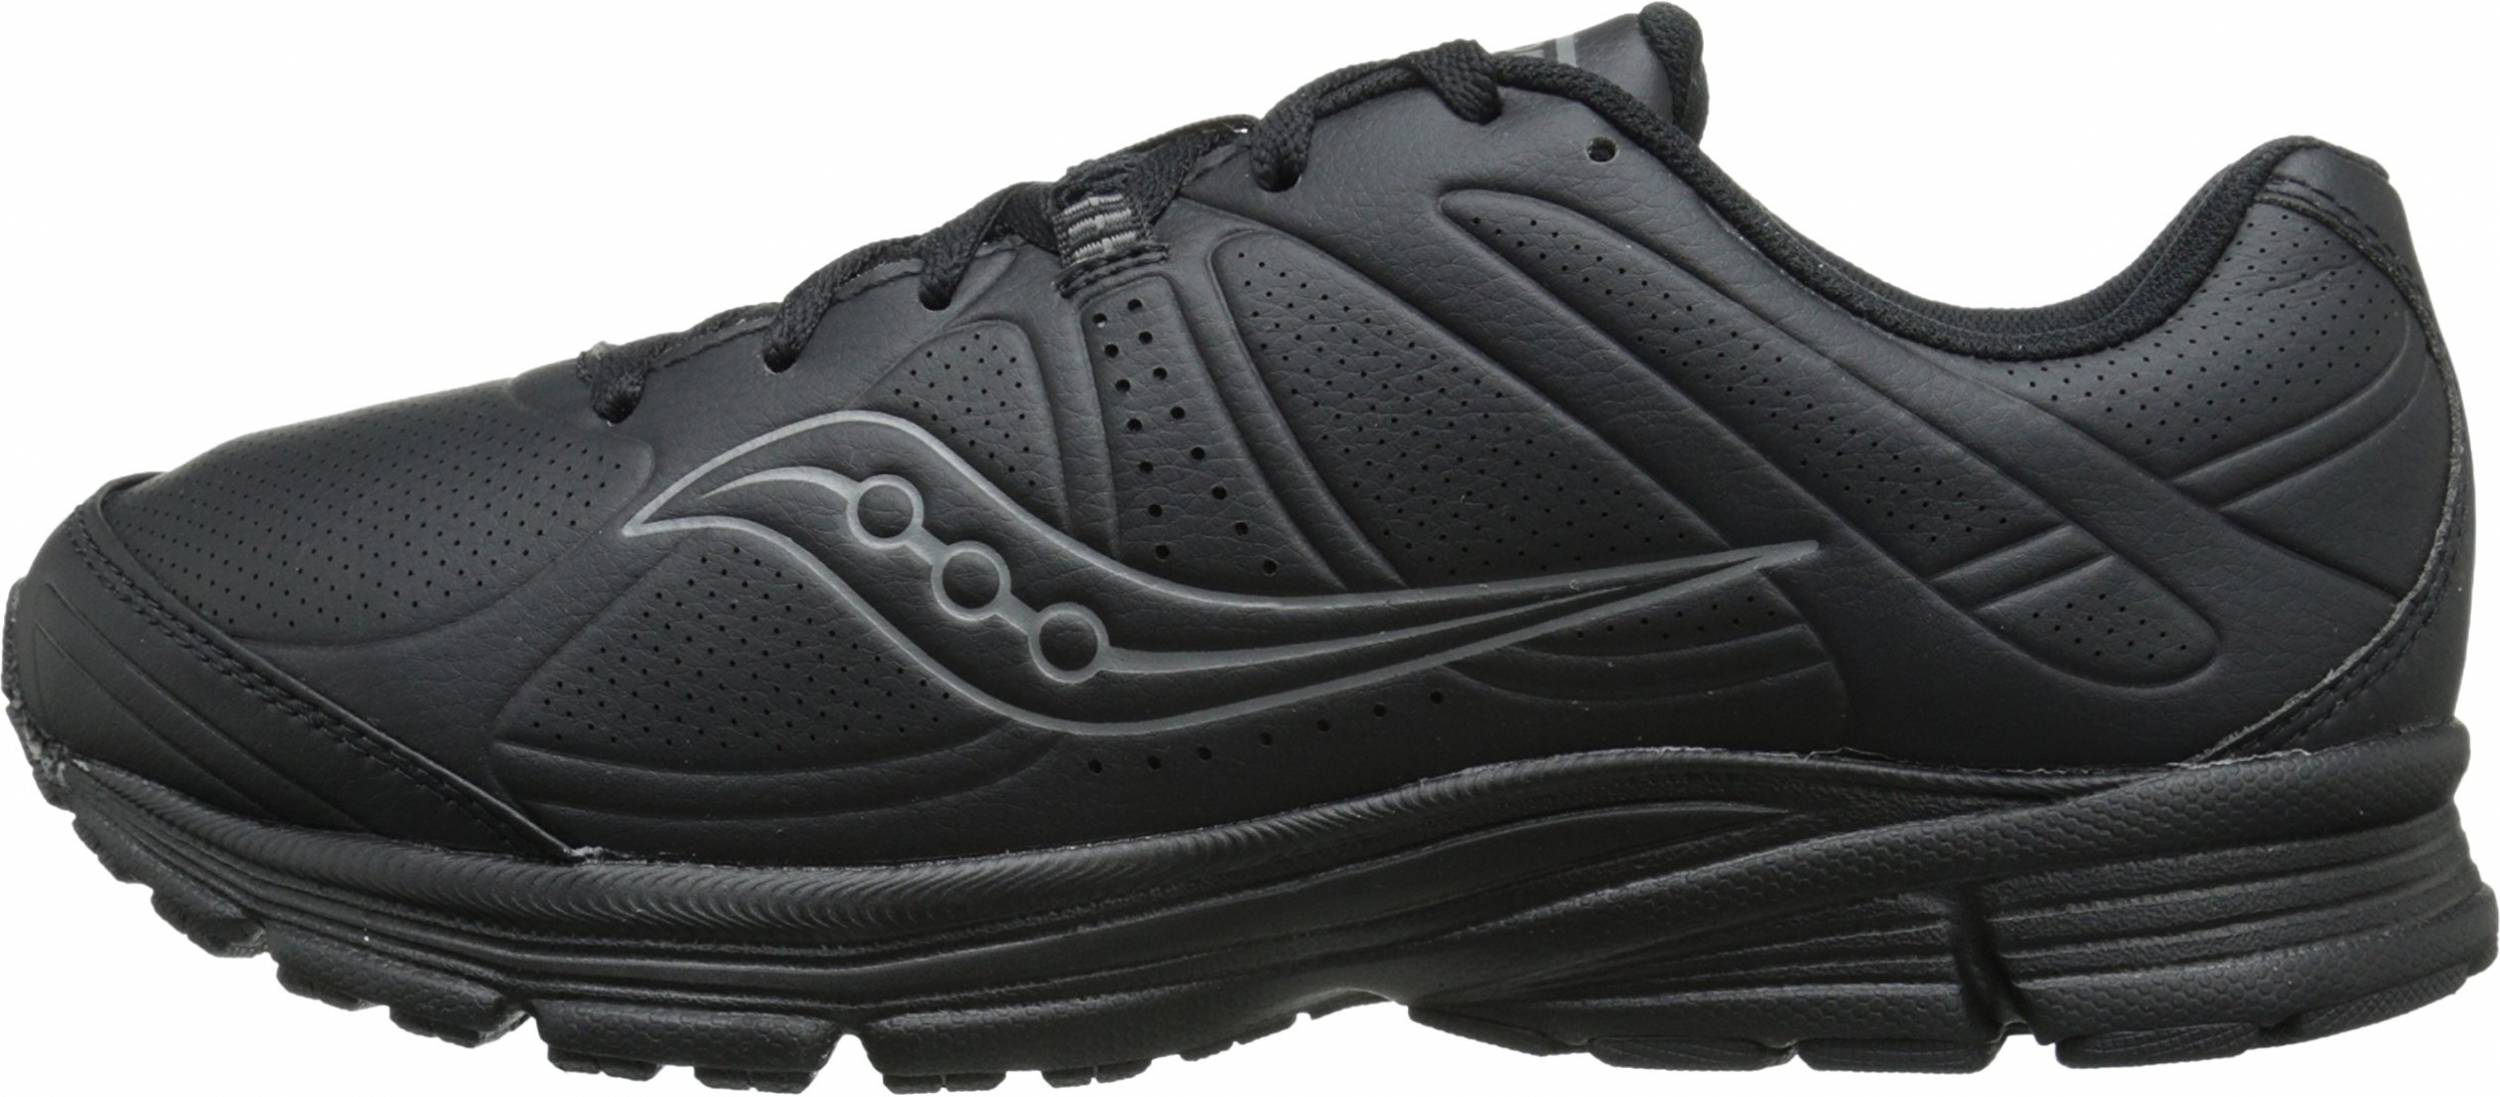 Save 26% on Saucony Walking Shoes (3 